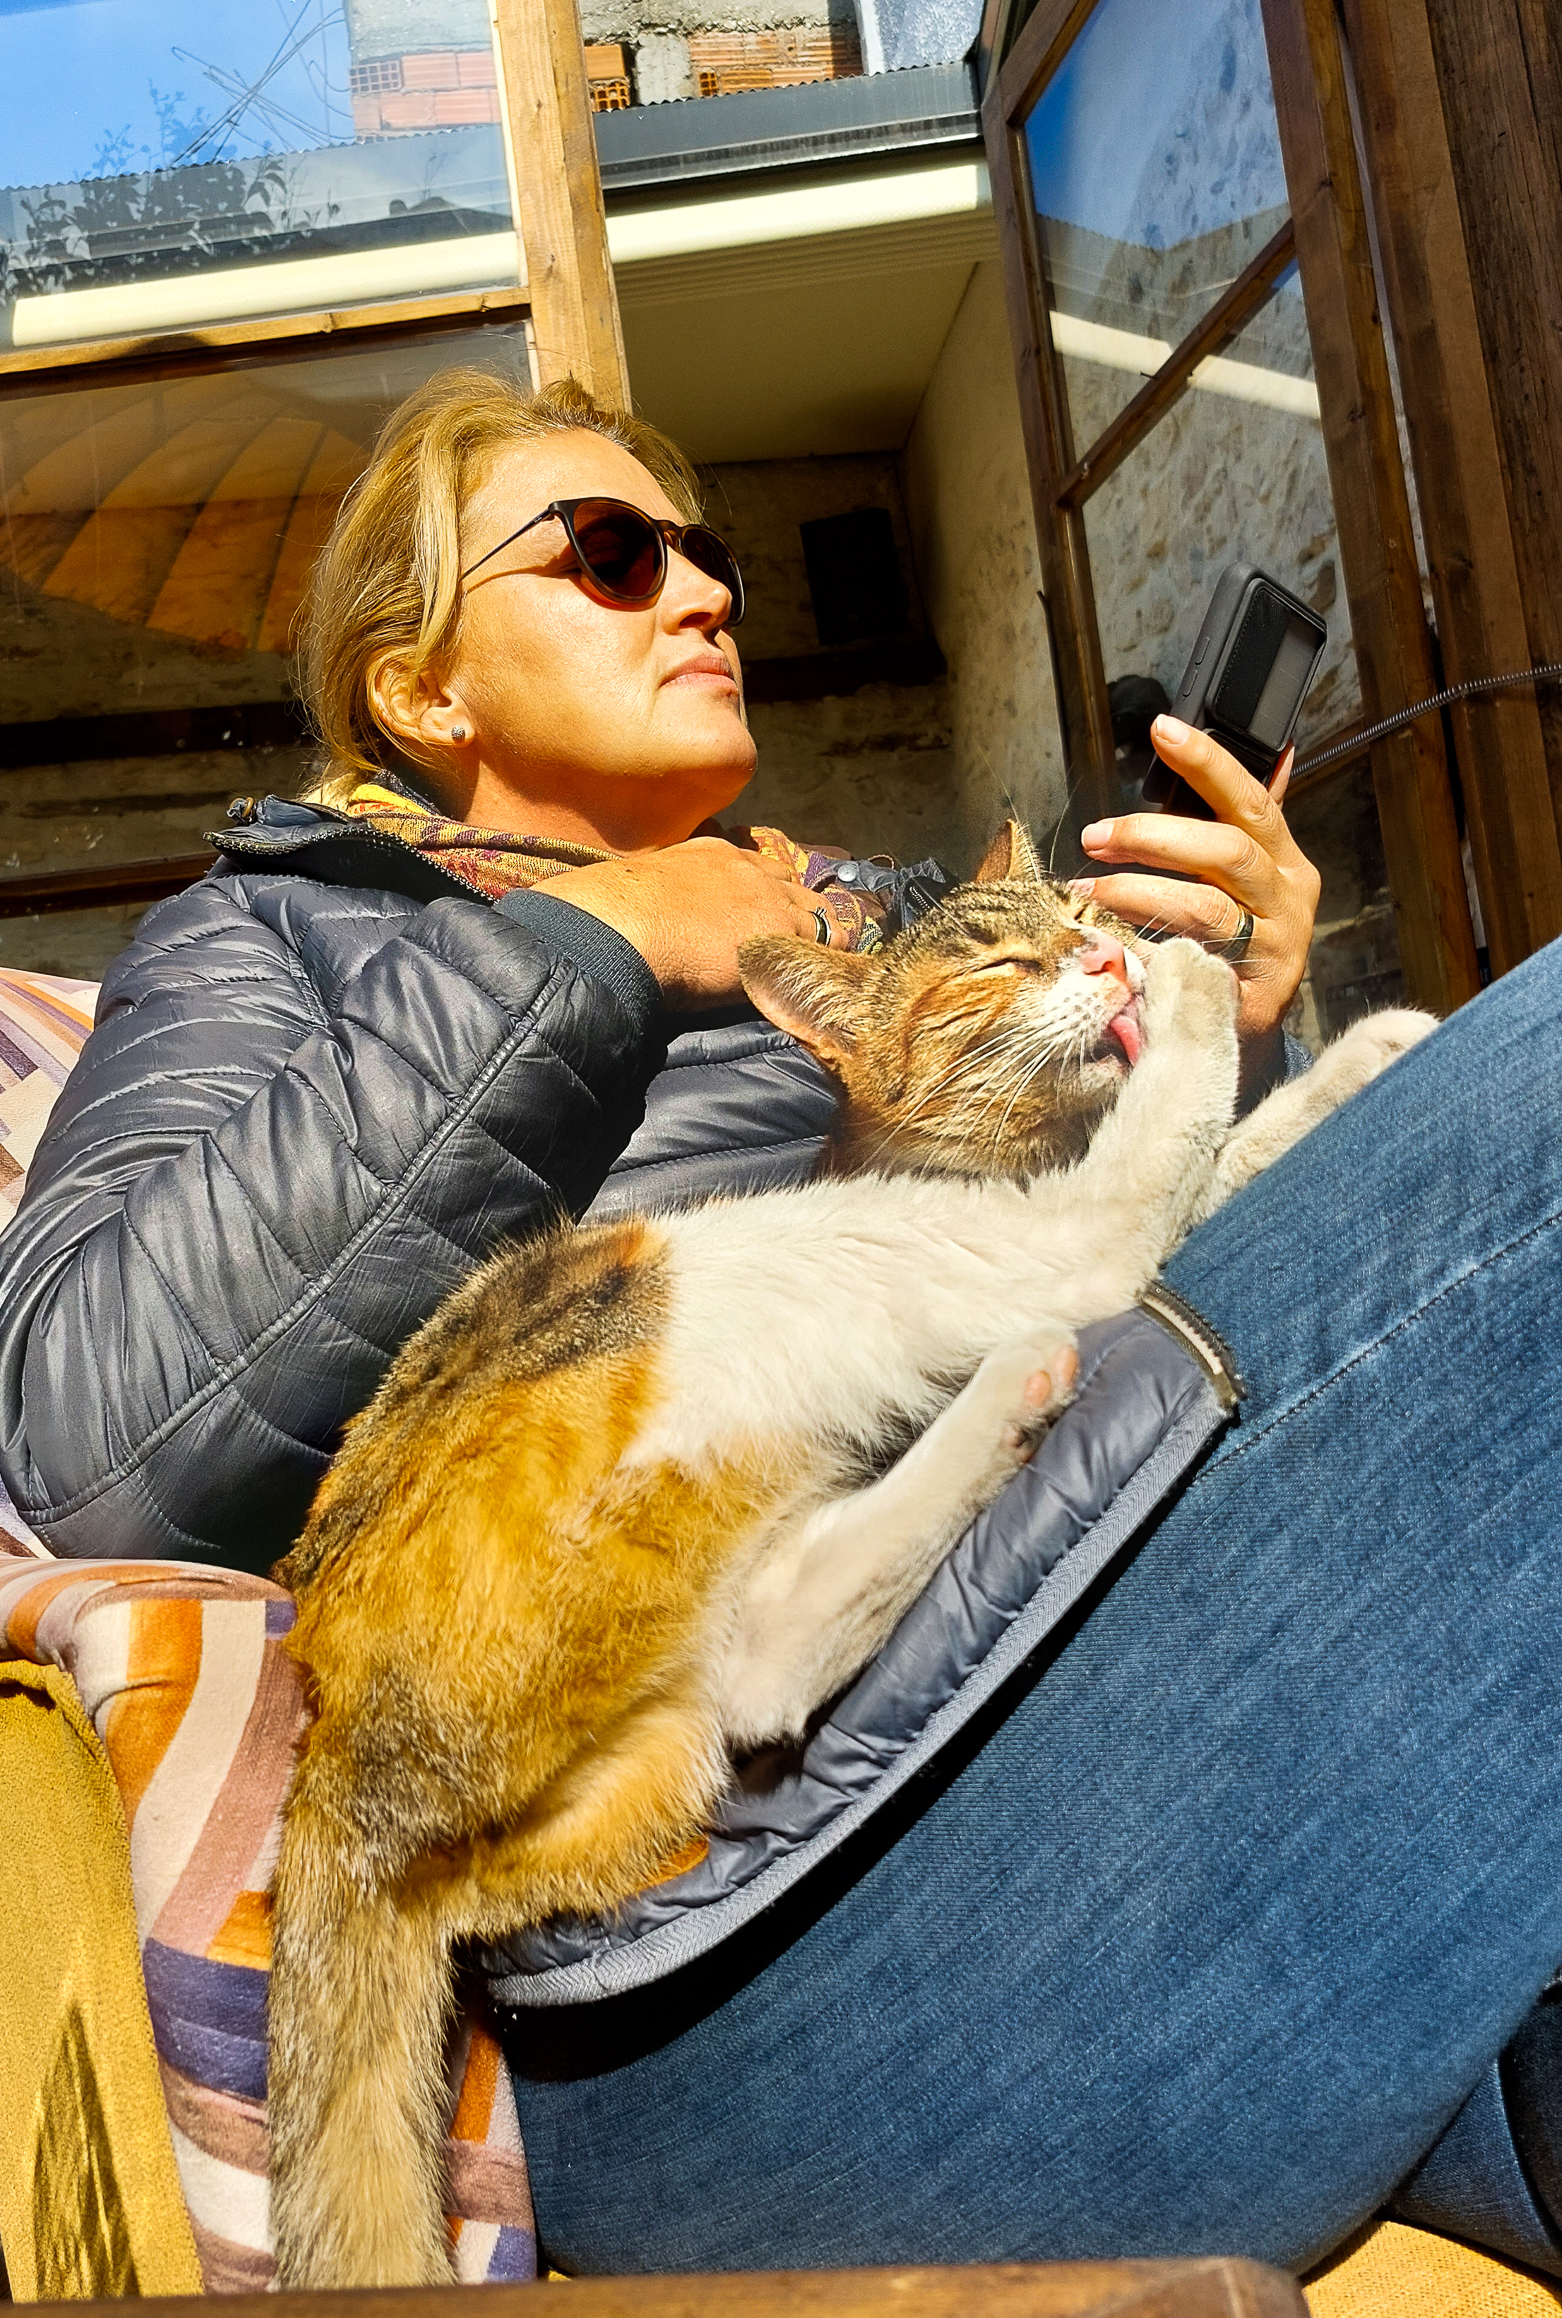 <span  class="uc_style_uc_tiles_grid_image_elementor_uc_items_attribute_title" style="color:#FFFFFF;">Heike got a (temporary) cat while we were having a glas of wine in a bar</span>